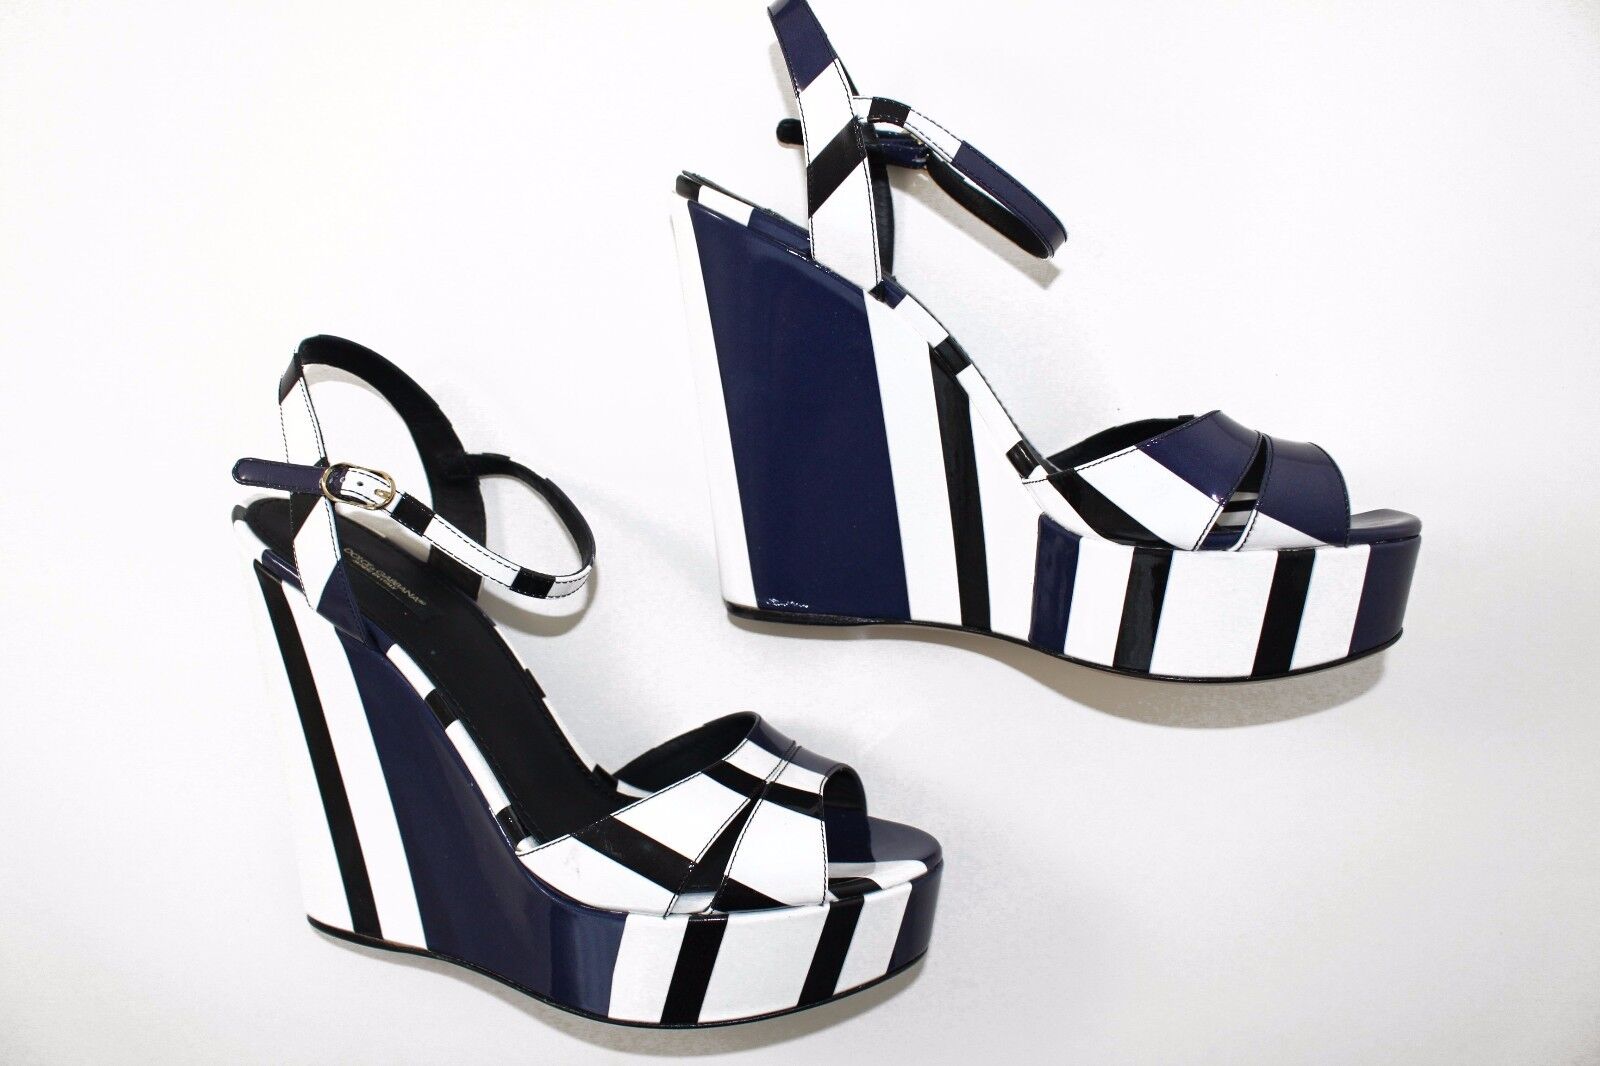 DOLCE & GABBANA BLUE AND WHITE PATENT LEATHER WEDGE SANDALS  EU 41 / US 11